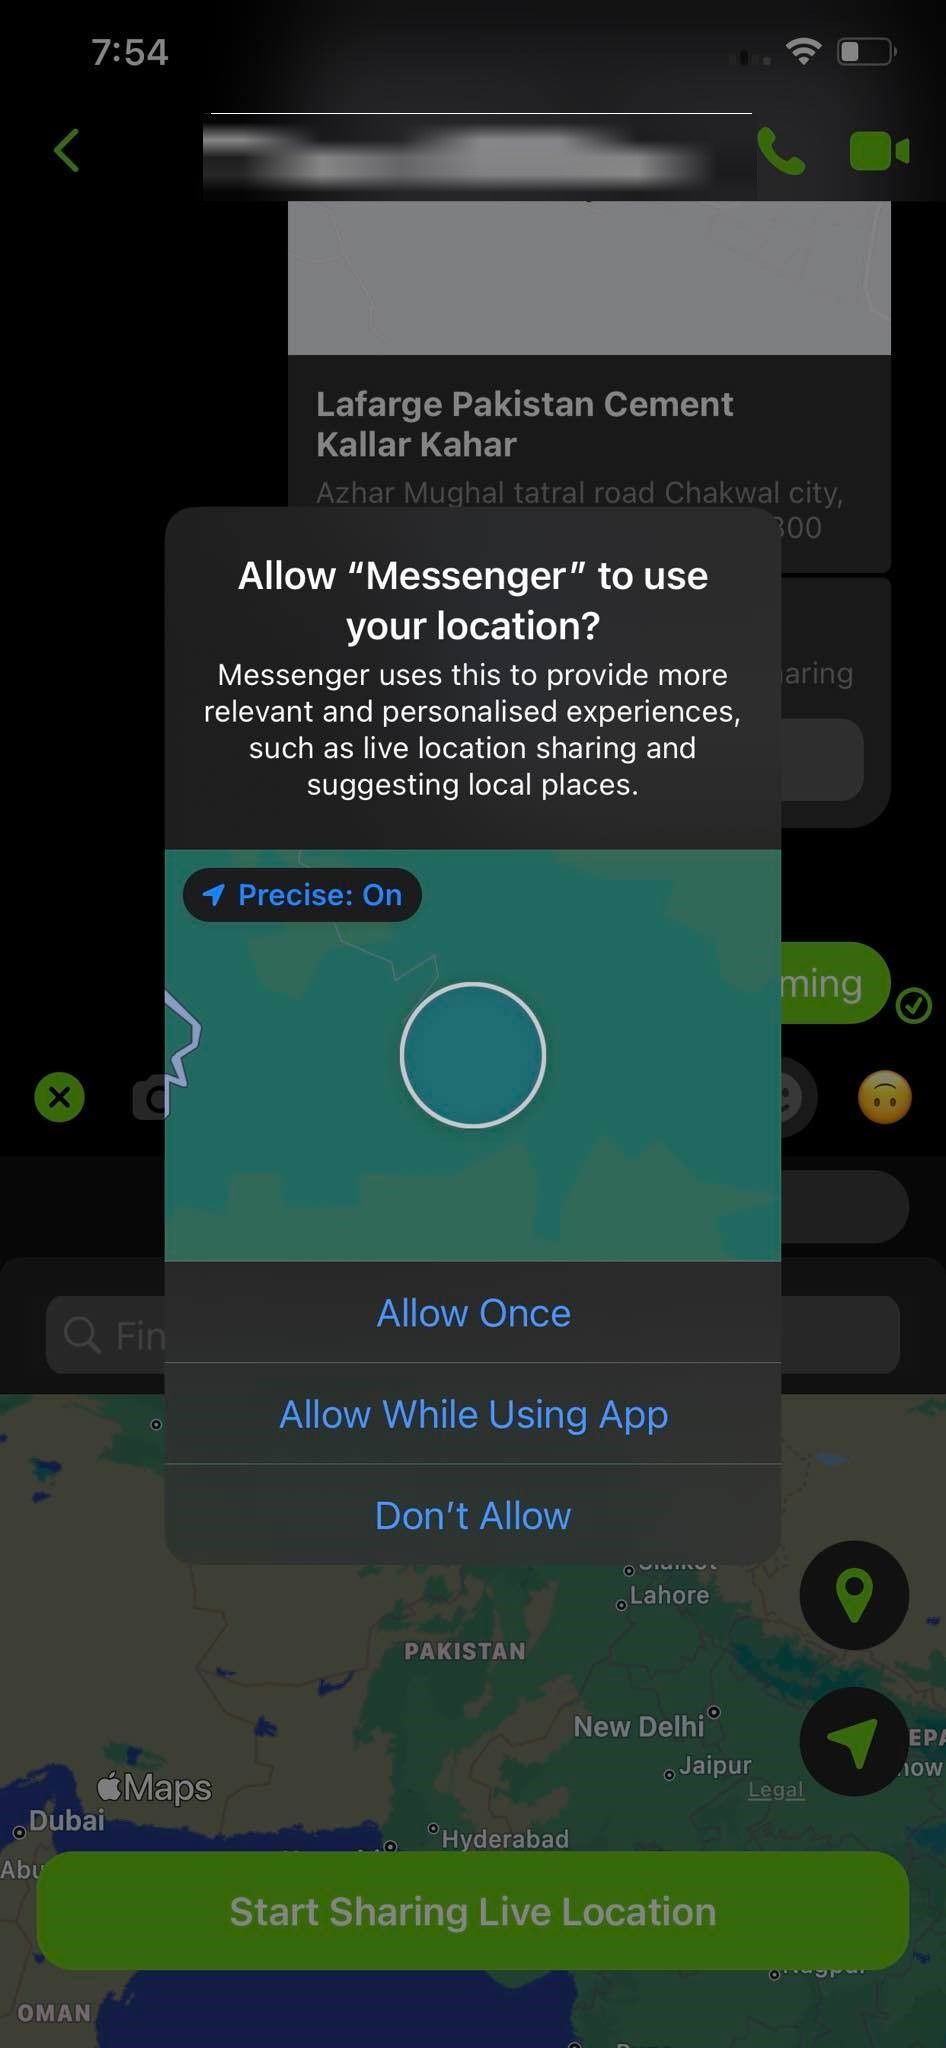 Permitting Facebook to Access Location in Facebook Messenger